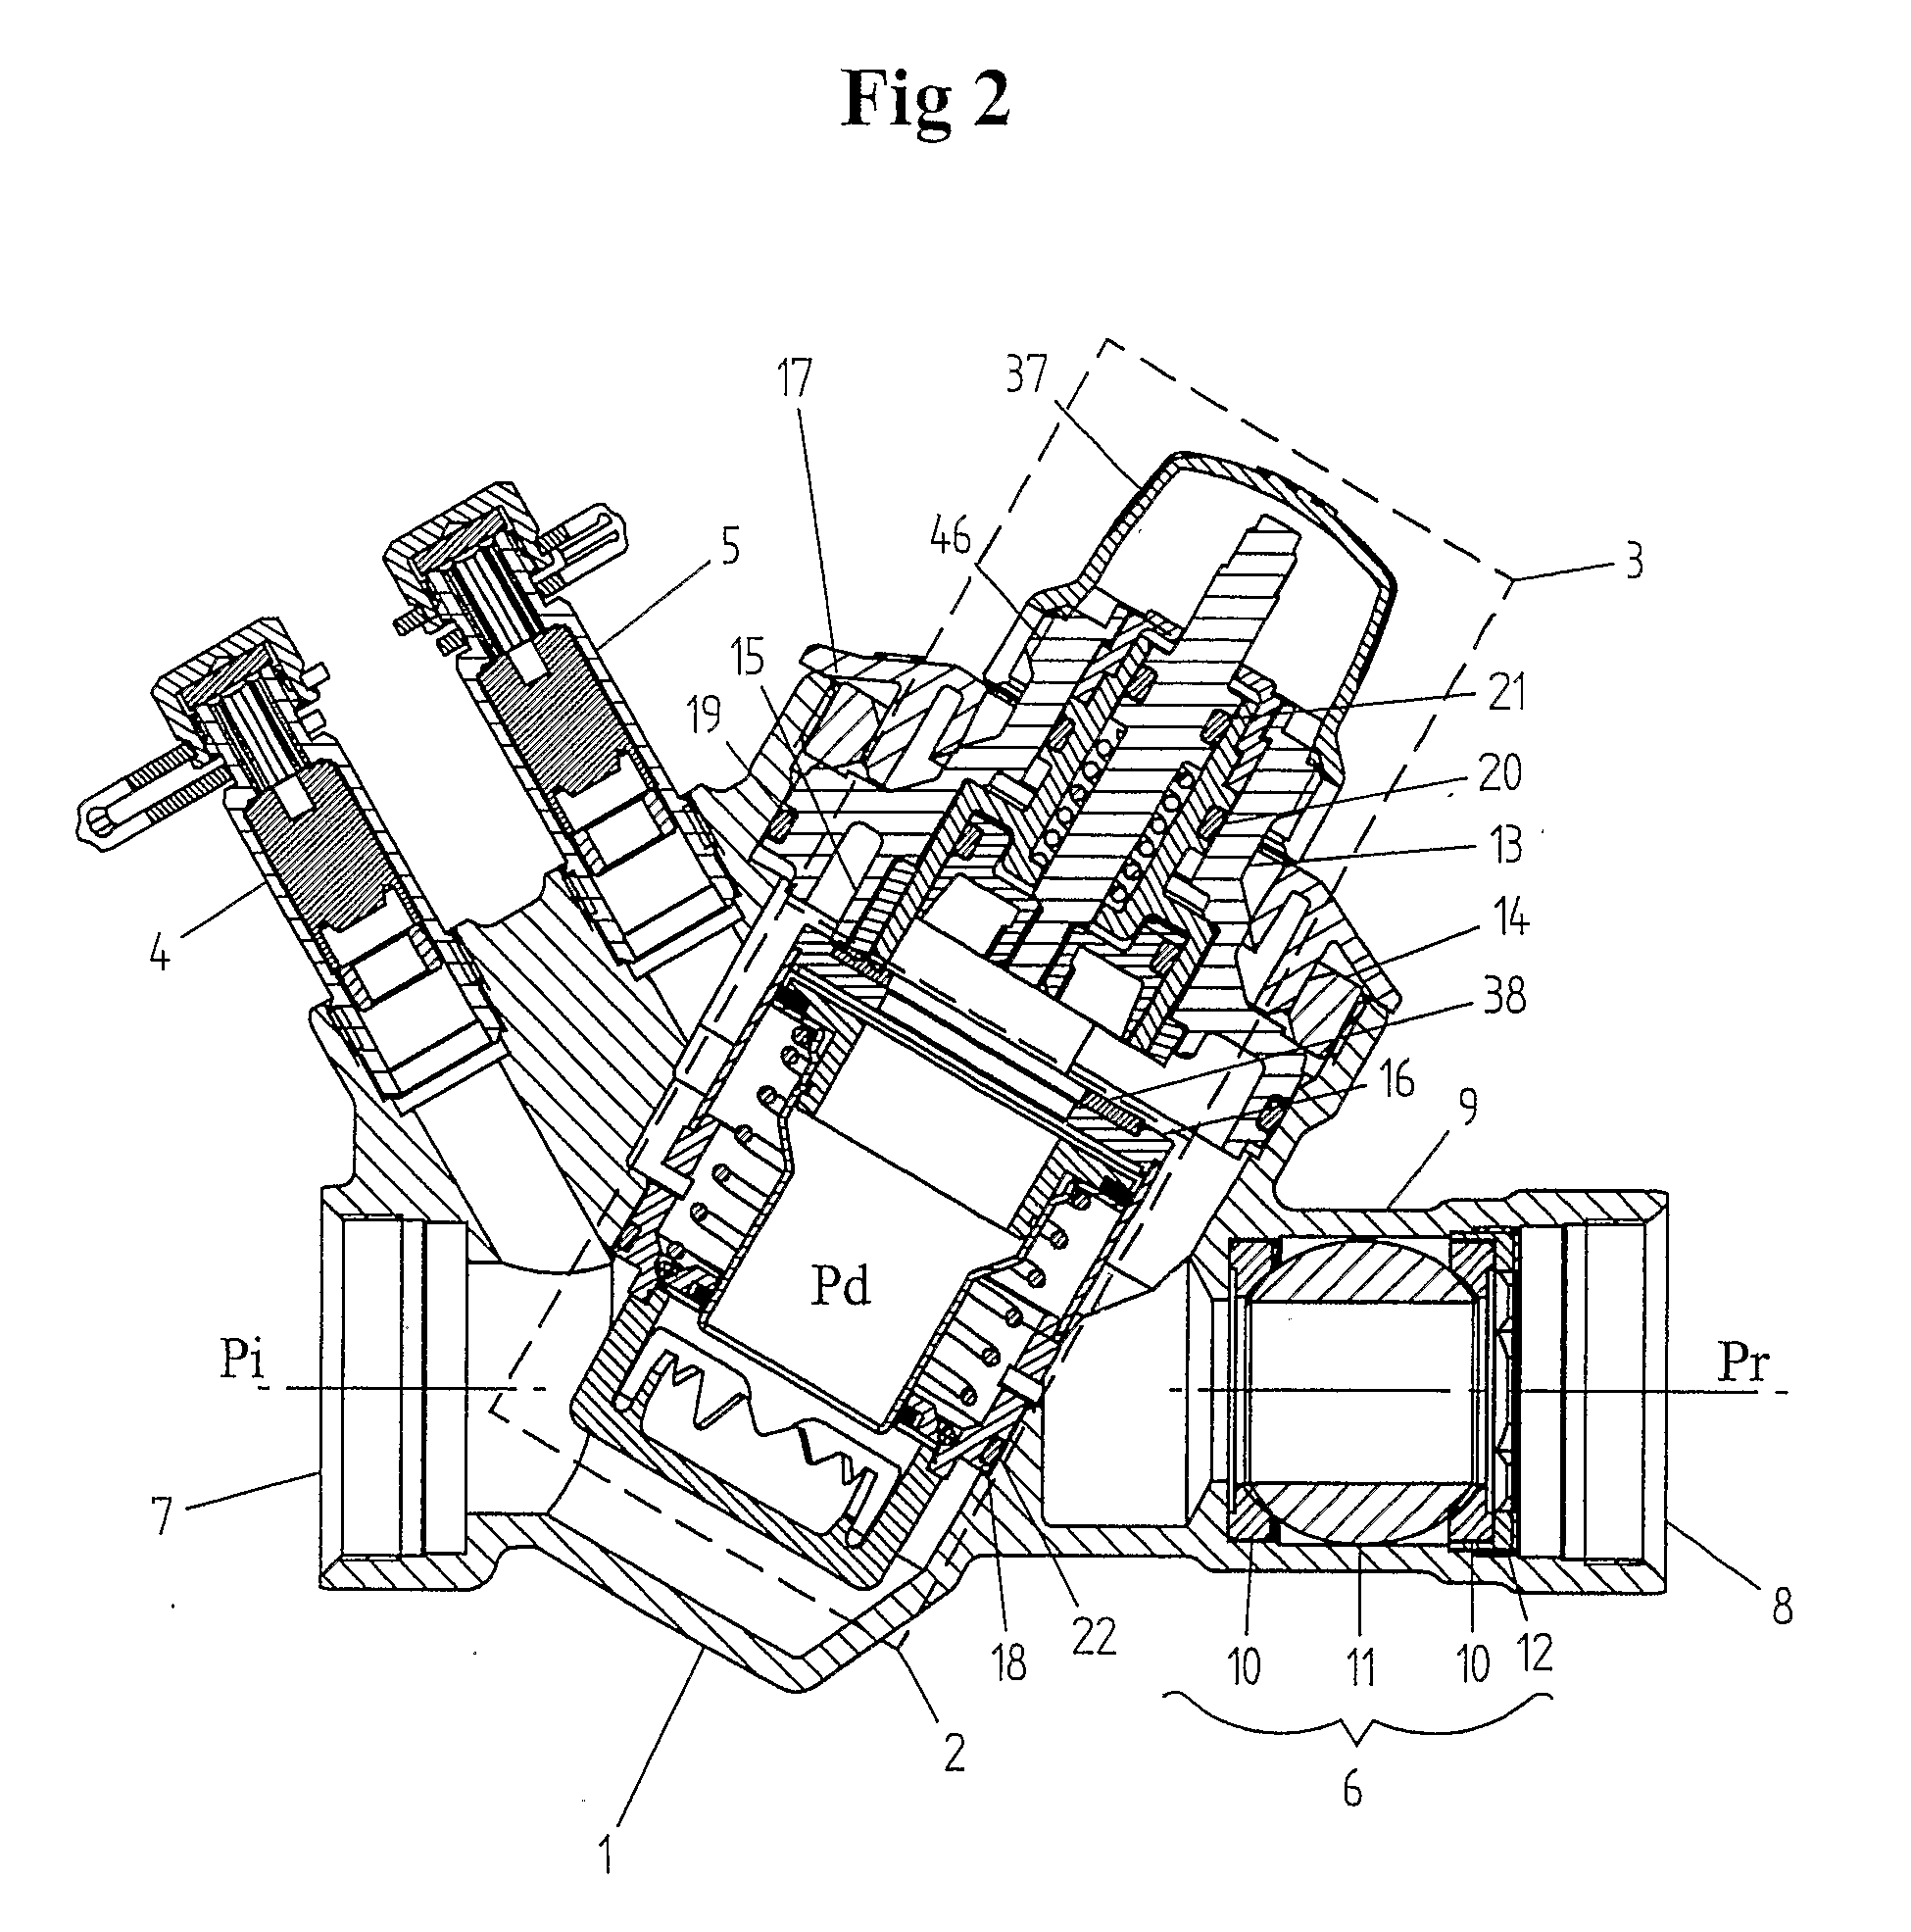 Apparatus for Regulating Flow of a Medium in a Heating and Cooling System